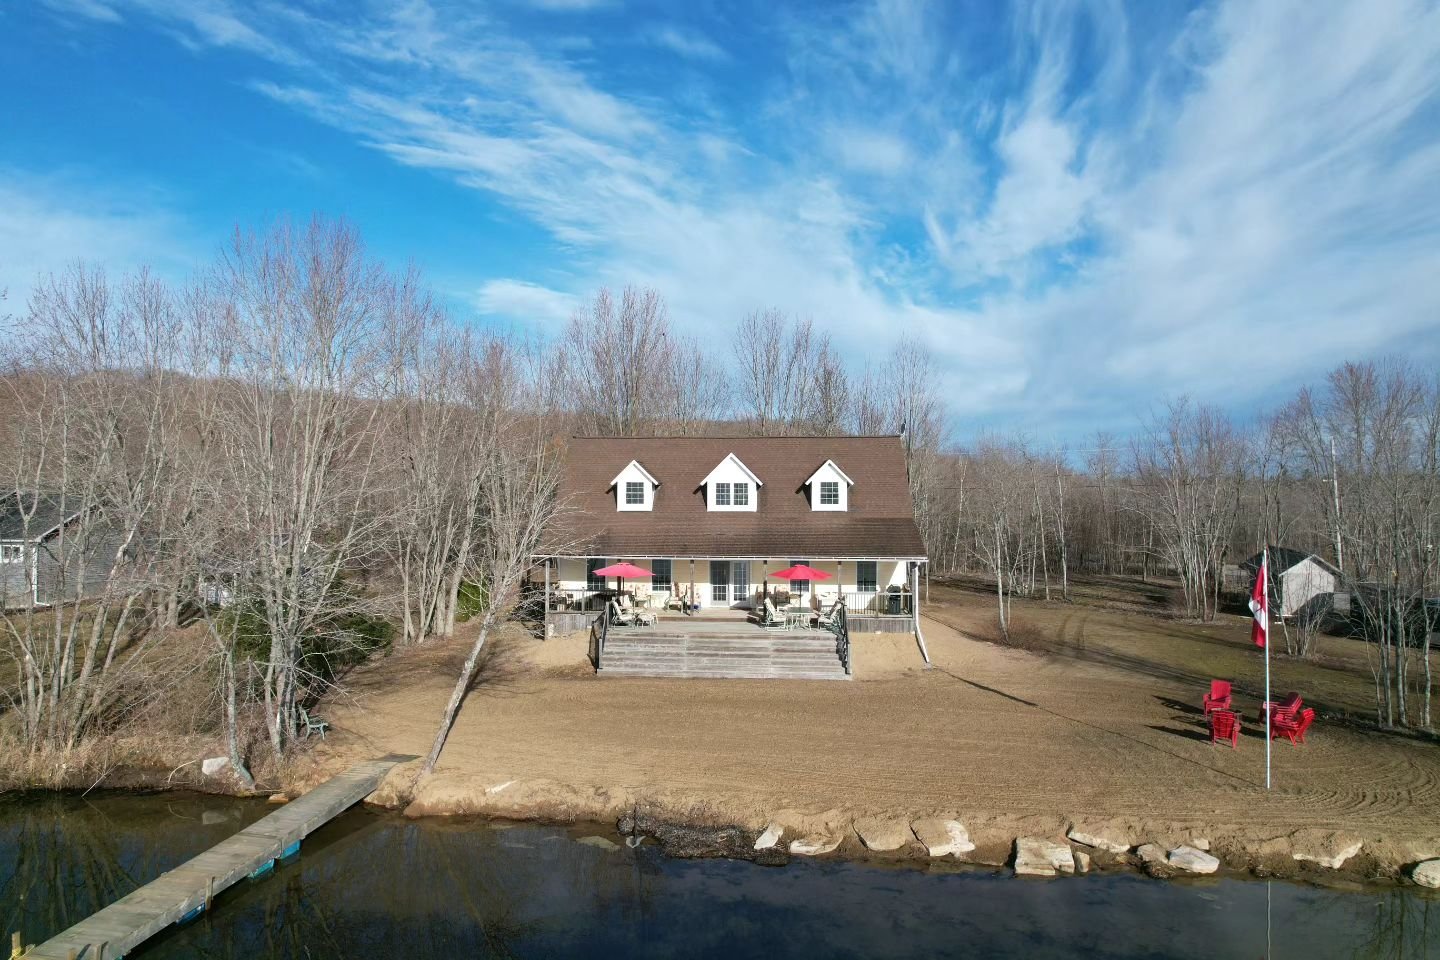 📍126 Baker Blvd, Head Lake
This delightful 1675sqft costal-inspired fully furnished waterfront cottage with big lake views sits on 160ft of sandy shoreline on picturesque Head Lake.
3 🛌 
1.5 🛁 
🌲 0.73 acres
🌊 160ft waterfront

Offered at $1,100,